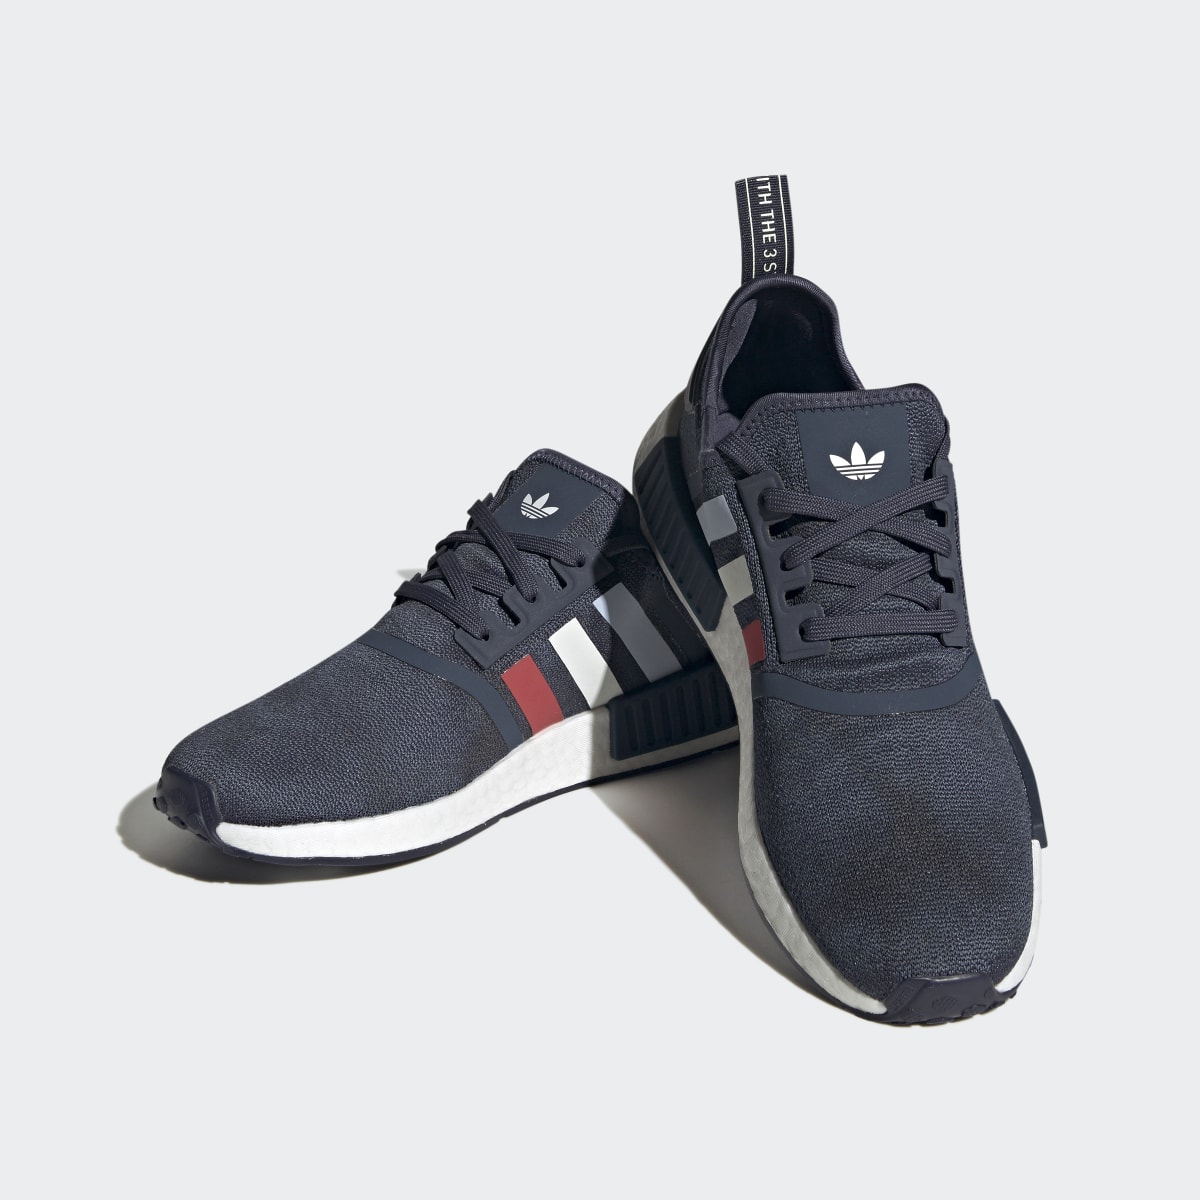 Adidas NMD_R1 Shoes. 8